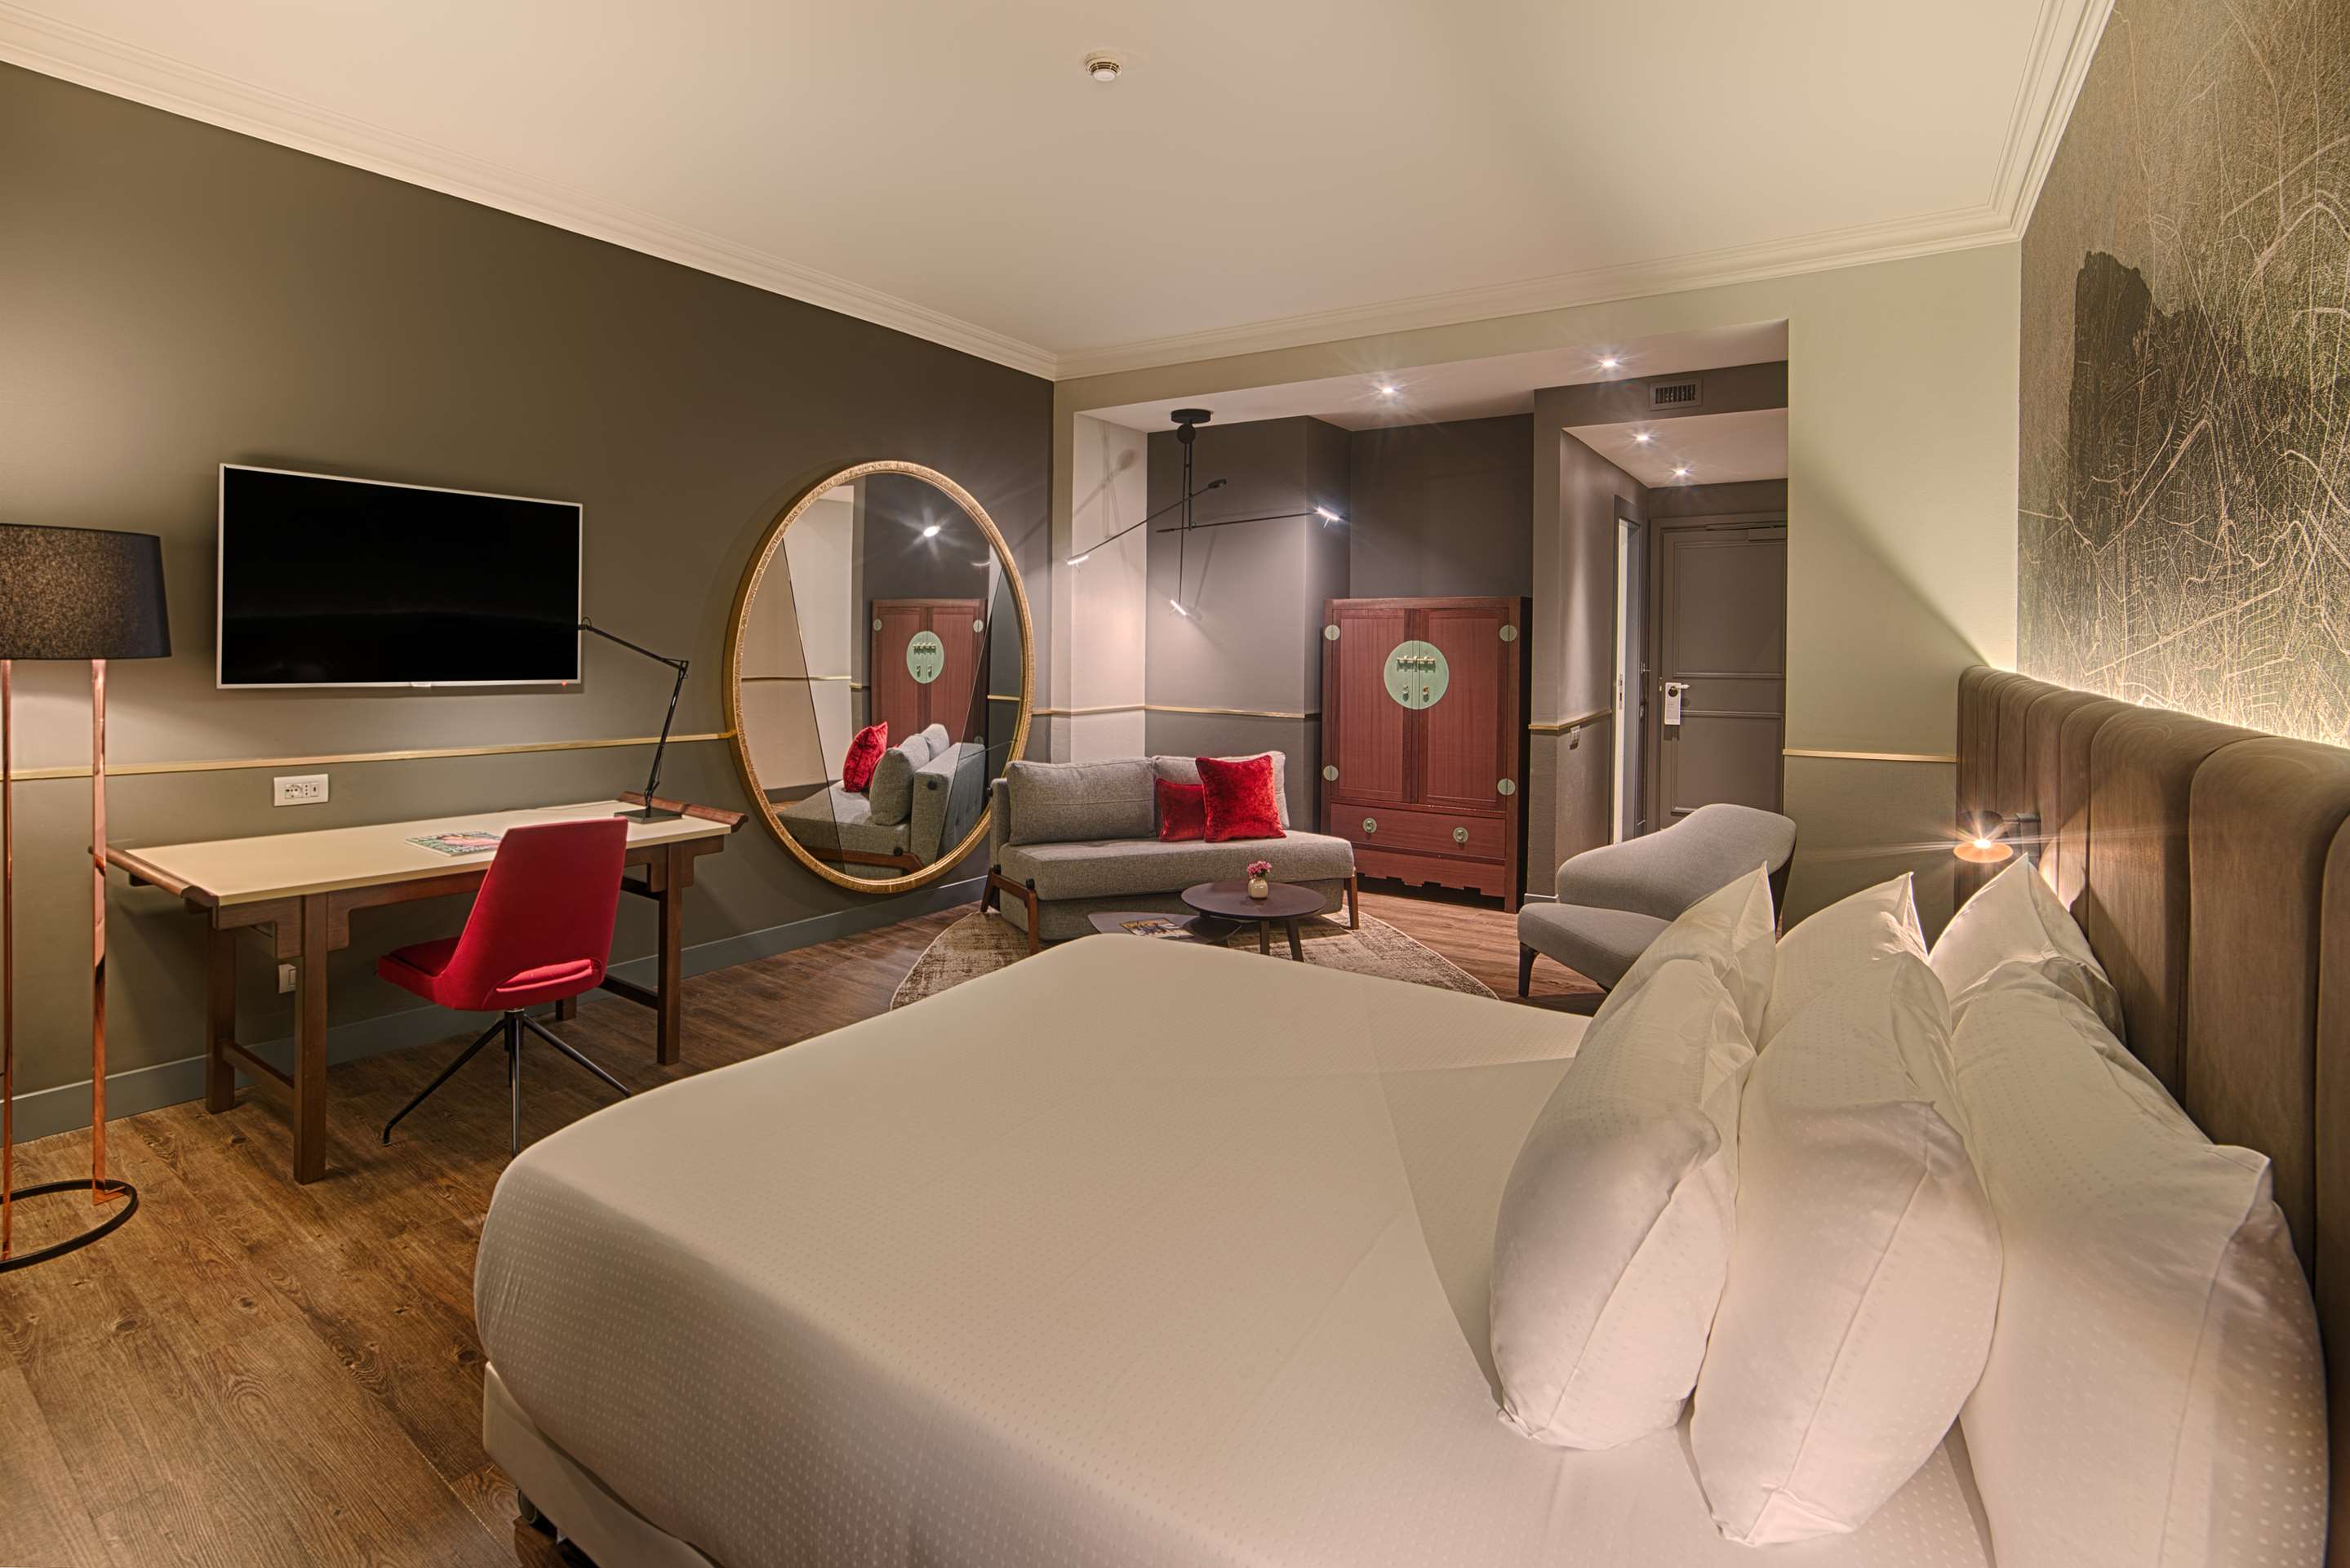 NH Collection Milano Porta Nuova-Milan Updated 2023 Room Price-Reviews &  Deals | Trip.com